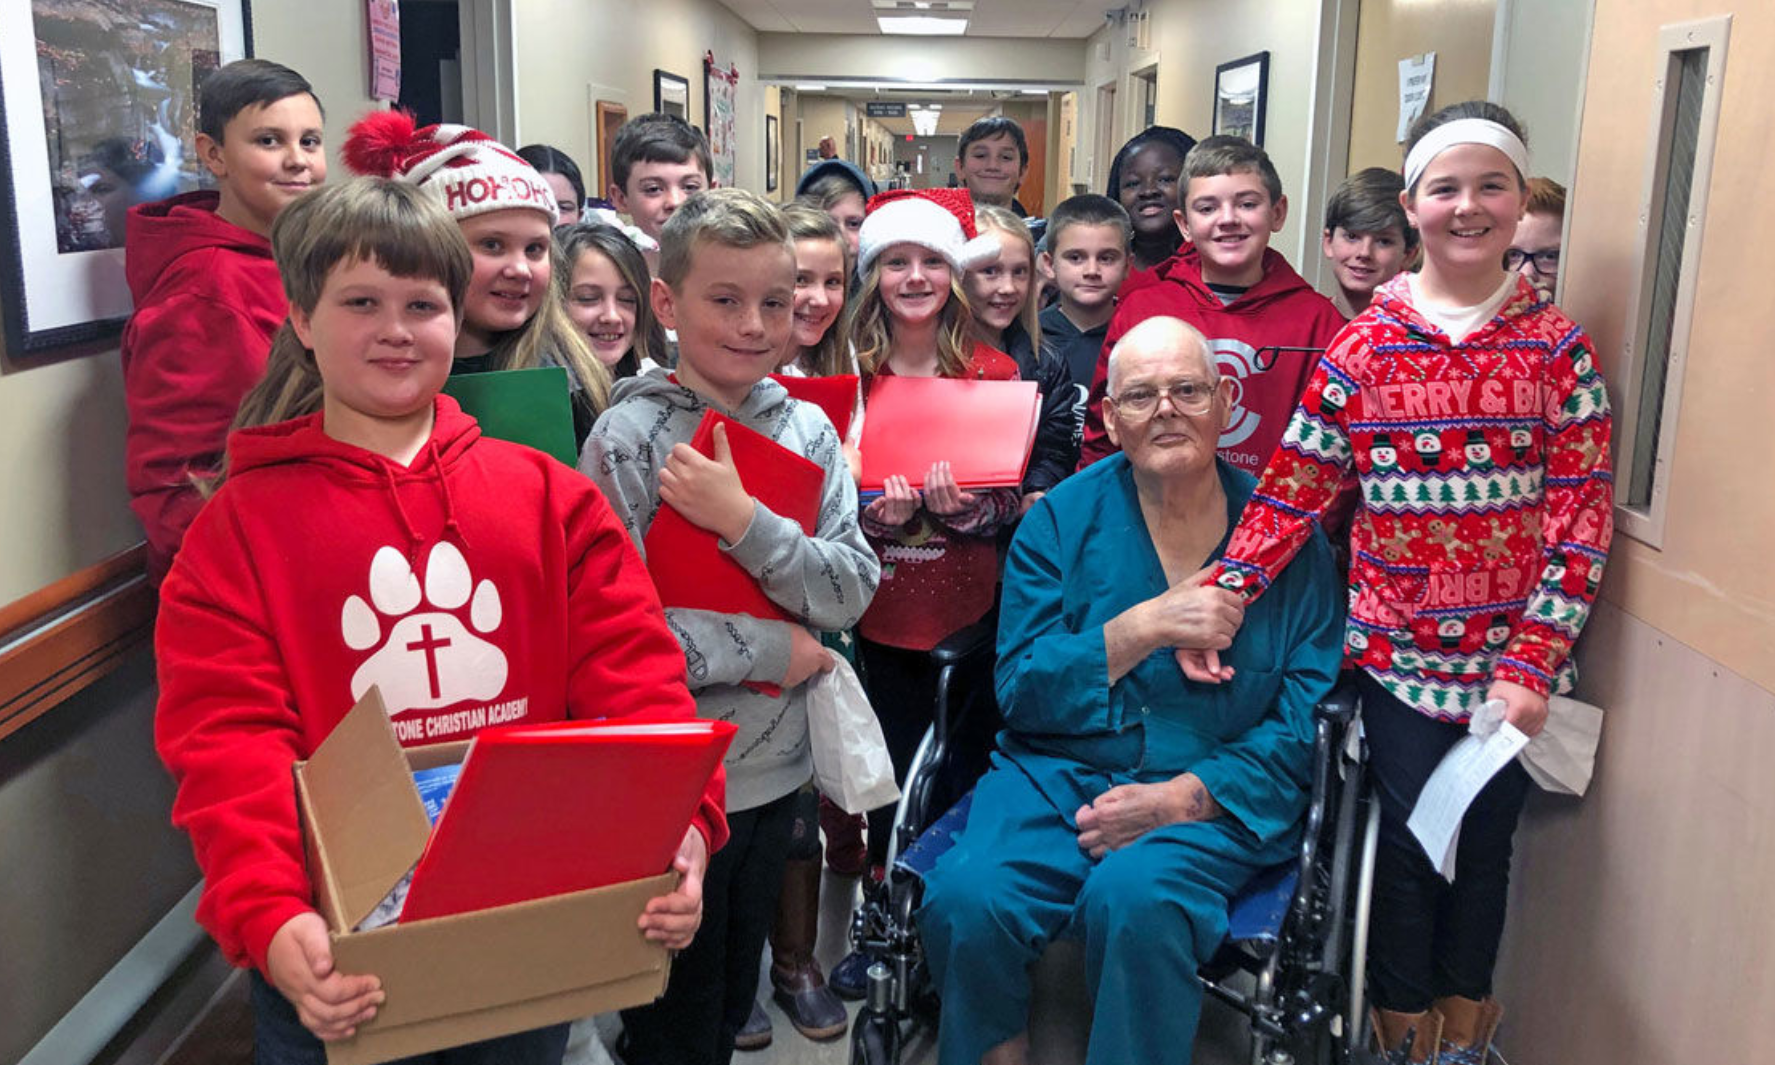 5th graders gather, donate 500 Christmas care packages to veterans in need